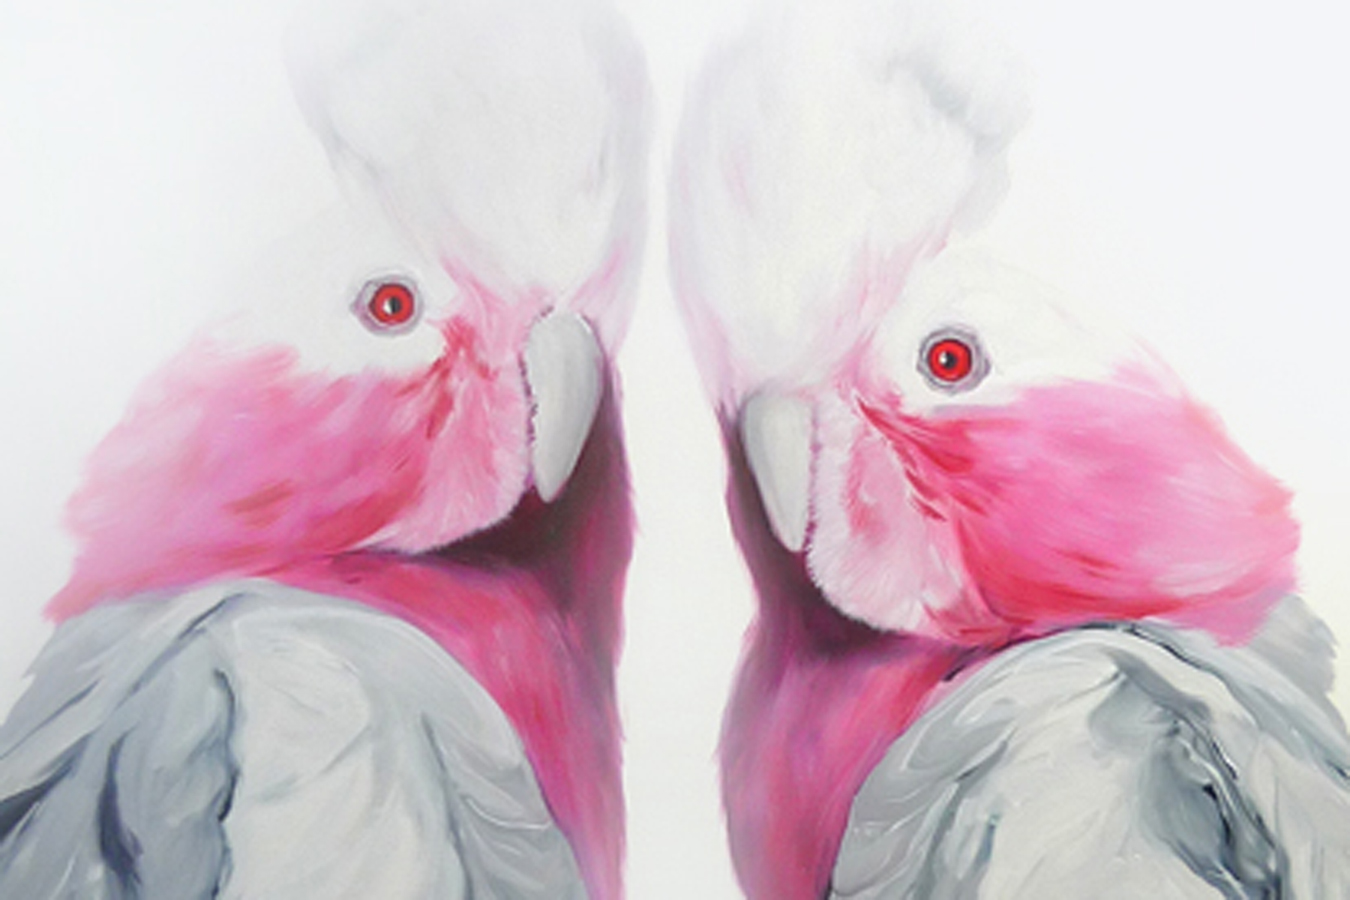 "Two Cockatoos" by Leila Cartier